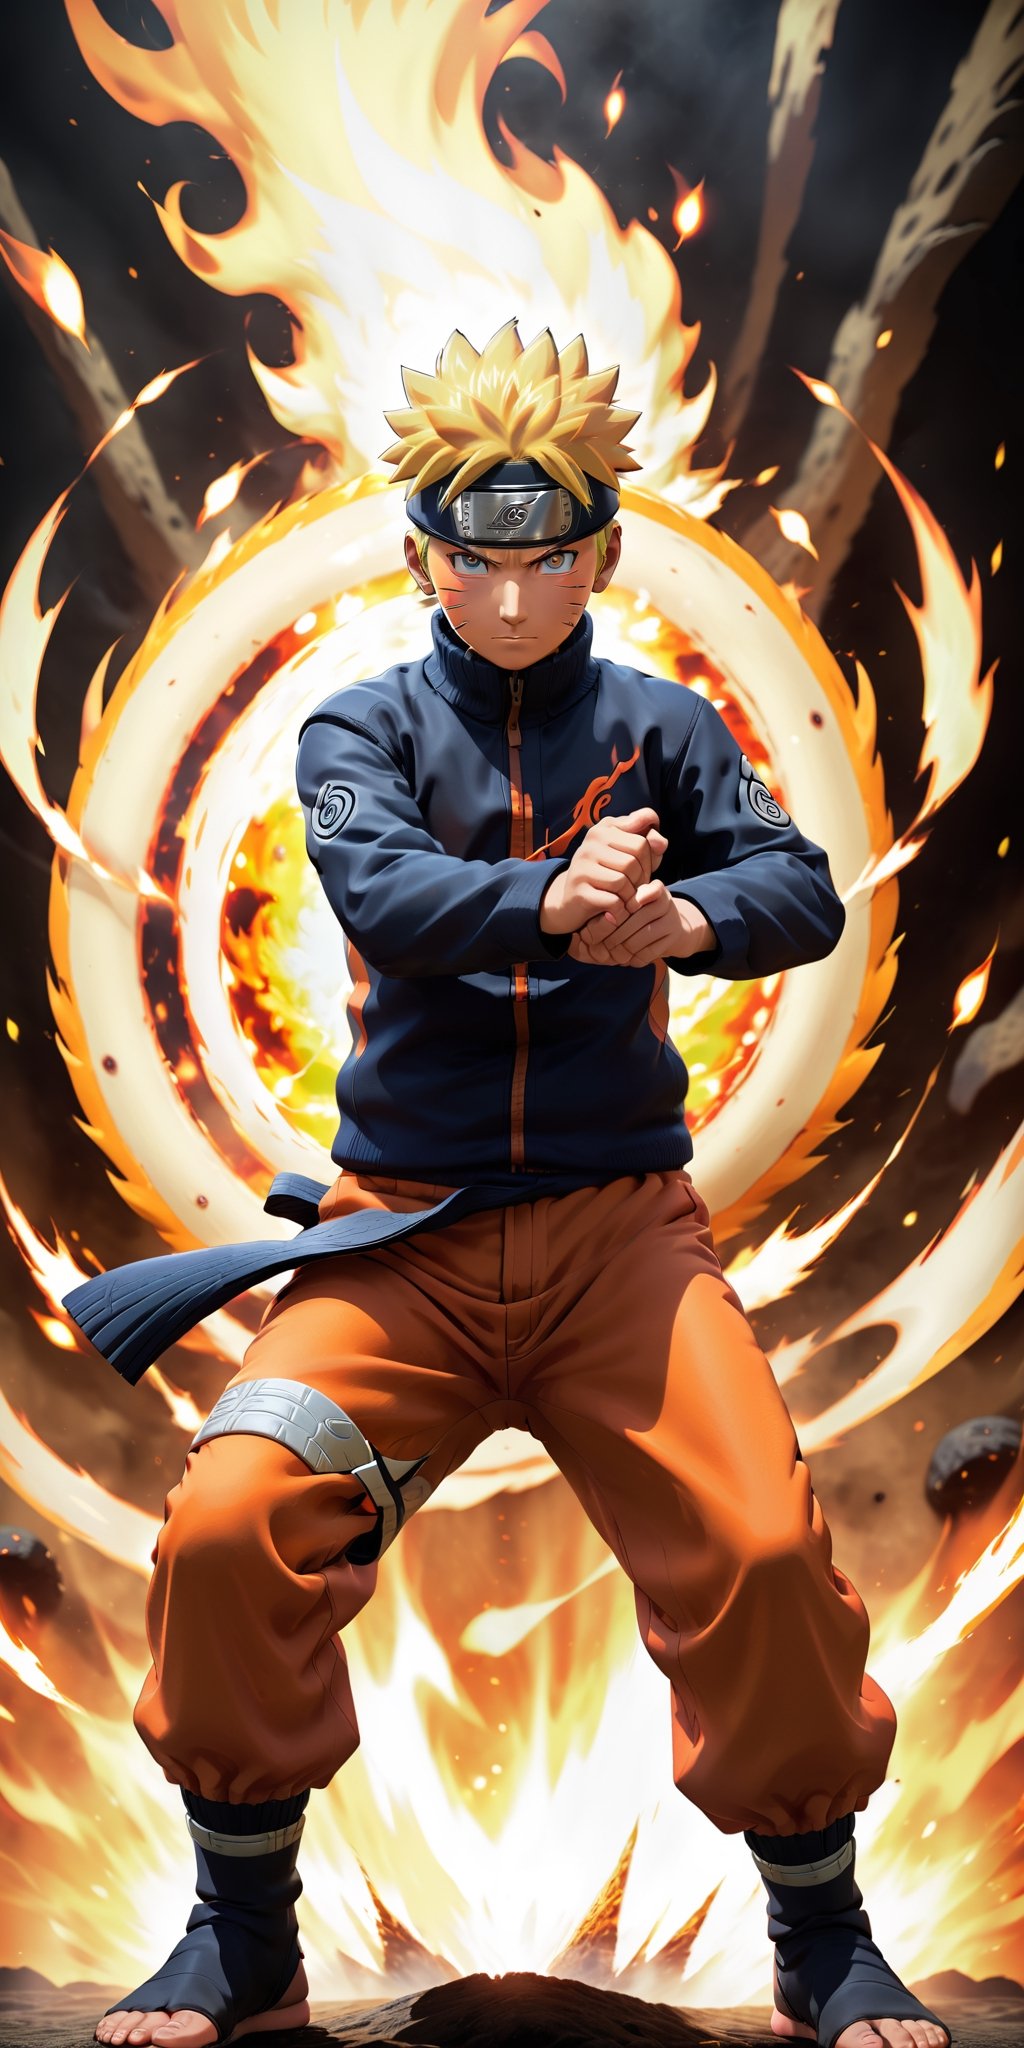 Animate a brief and intense scene featuring Naruto Uzumaki using fire powers. Request a short yet impactful animation capturing Naruto's mastery of fire techniques. Emphasize the fiery details, dynamic movements, and a background that enhances the intensity of his fire-based powers. Aim for a visually striking and captivating animation that showcases Naruto Uzumaki's prowess with flames in a short, action-packed sequence